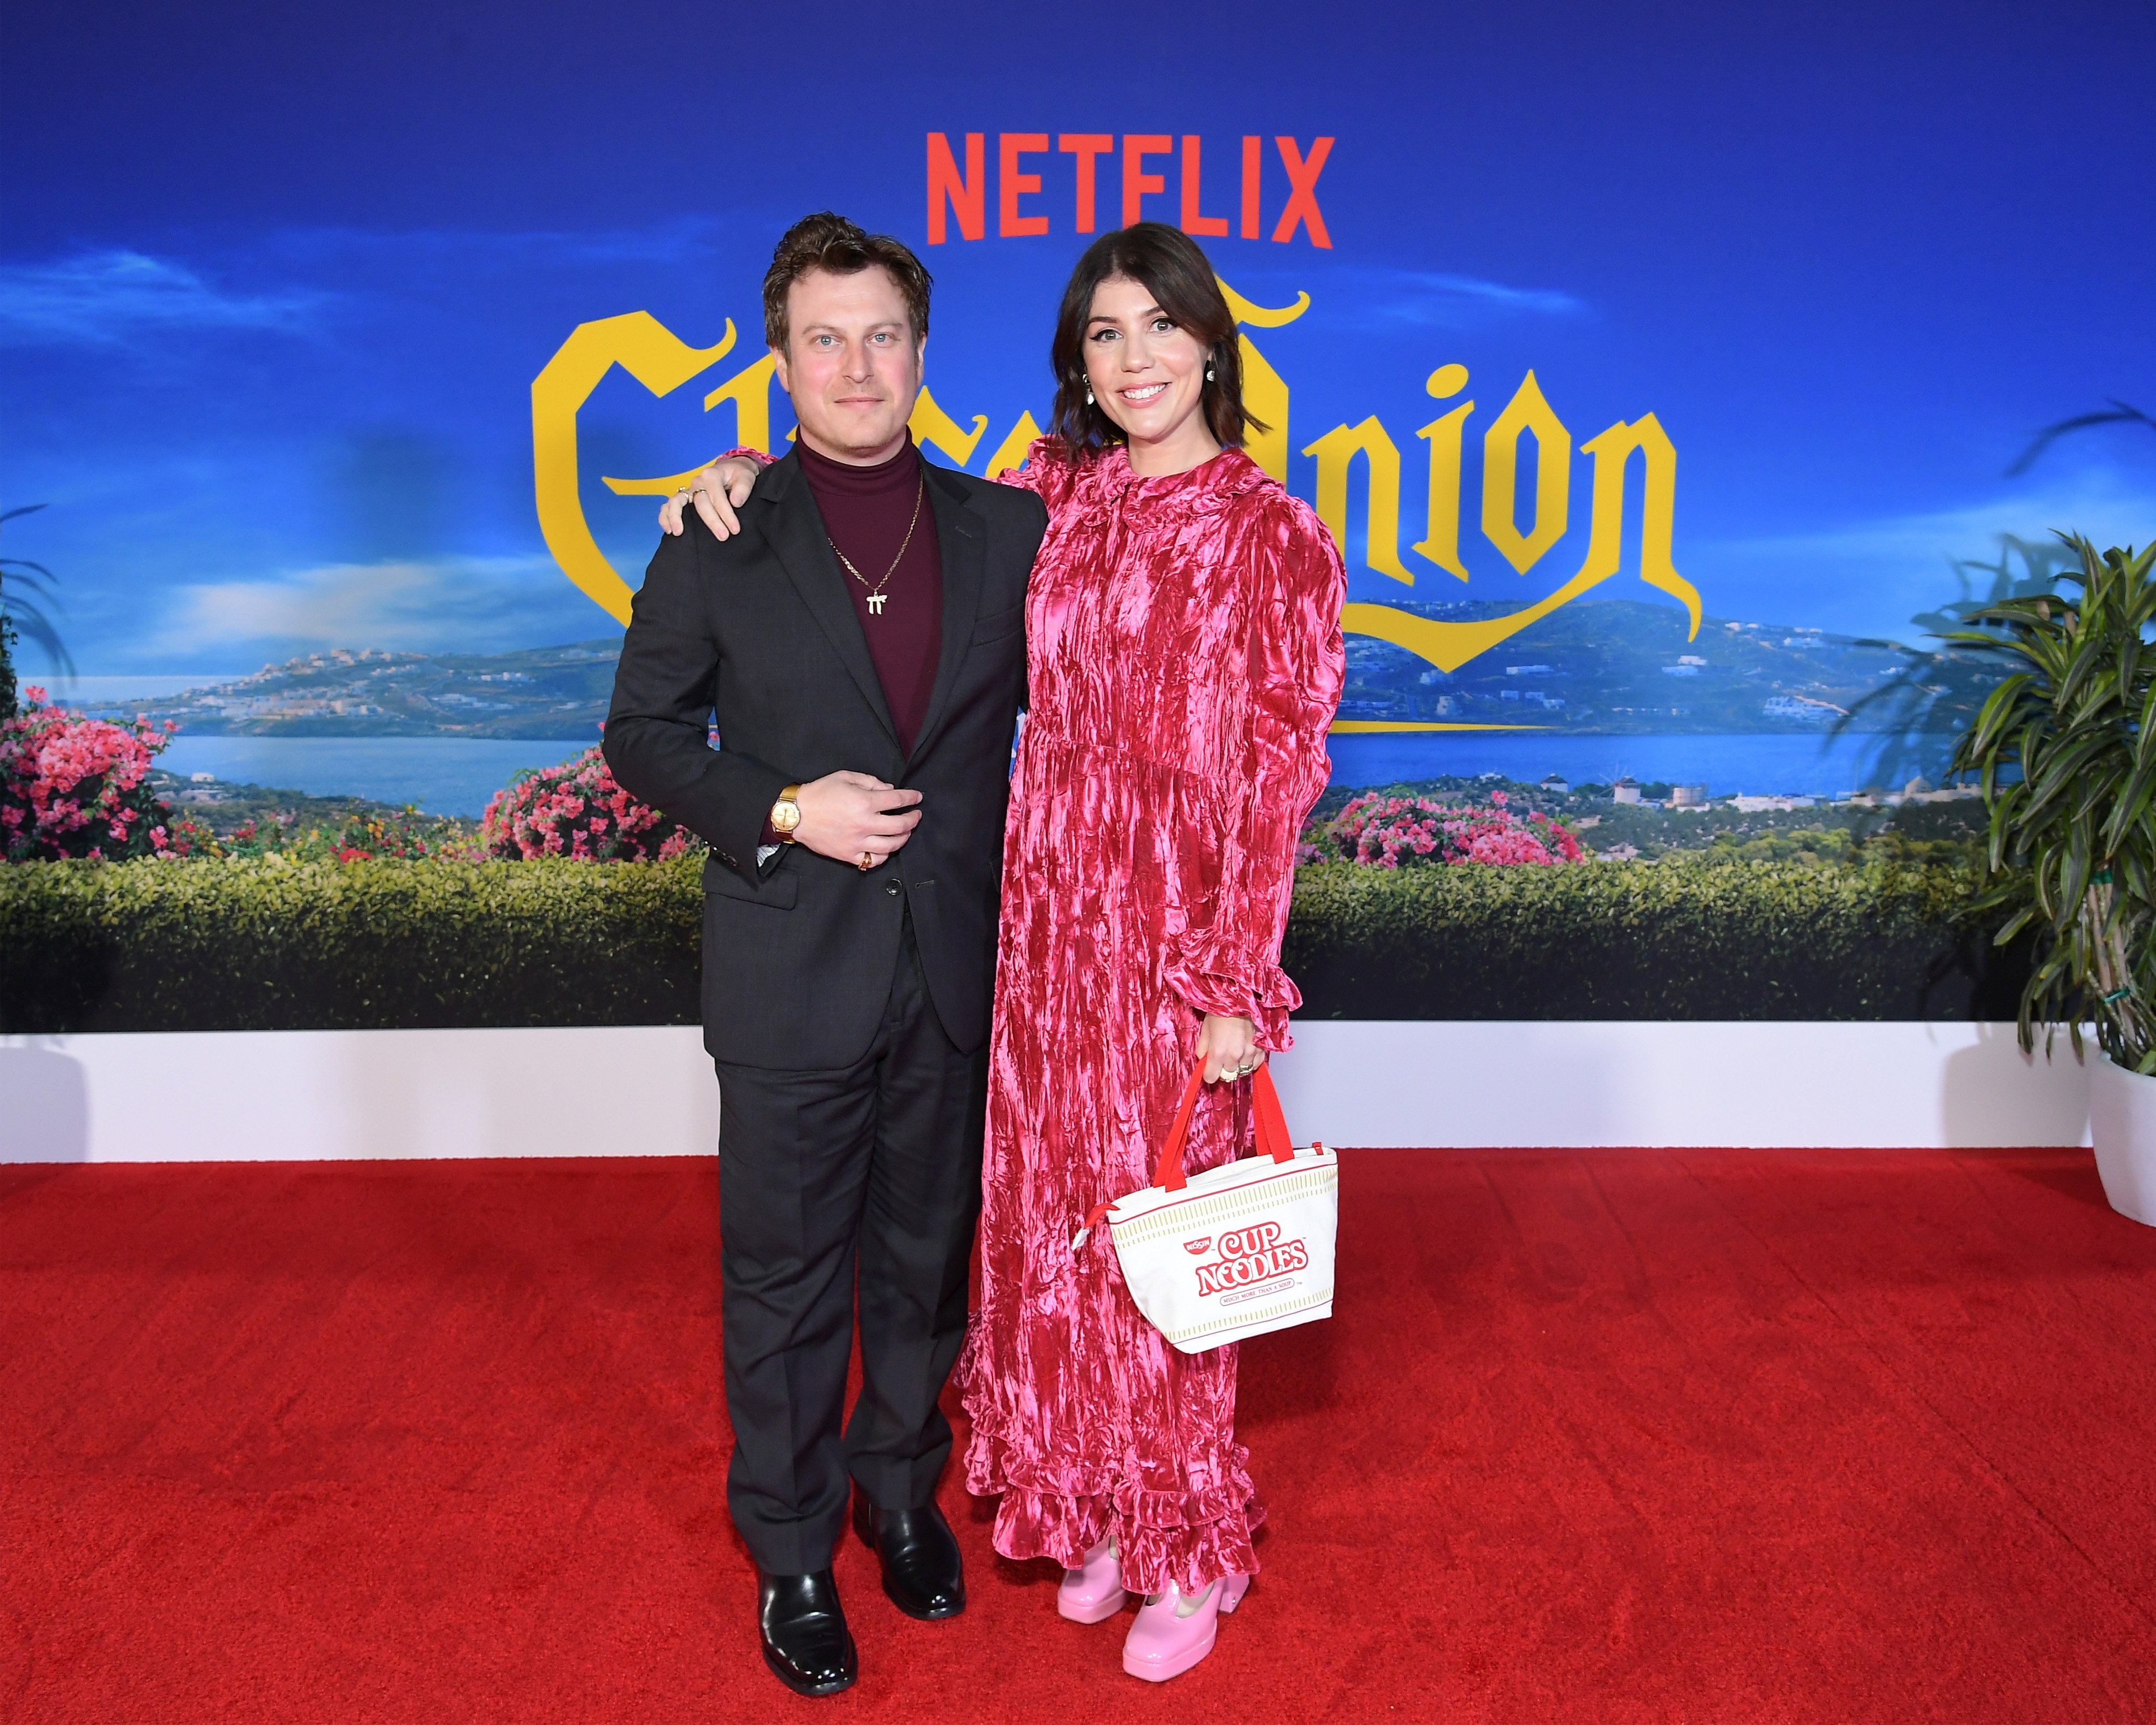 Noah Segan and Alison Bennett at the premiere of "Glass Onion: A Knives Out Mystery" on November 14, 2022, in Los Angeles | Source: Getty Images